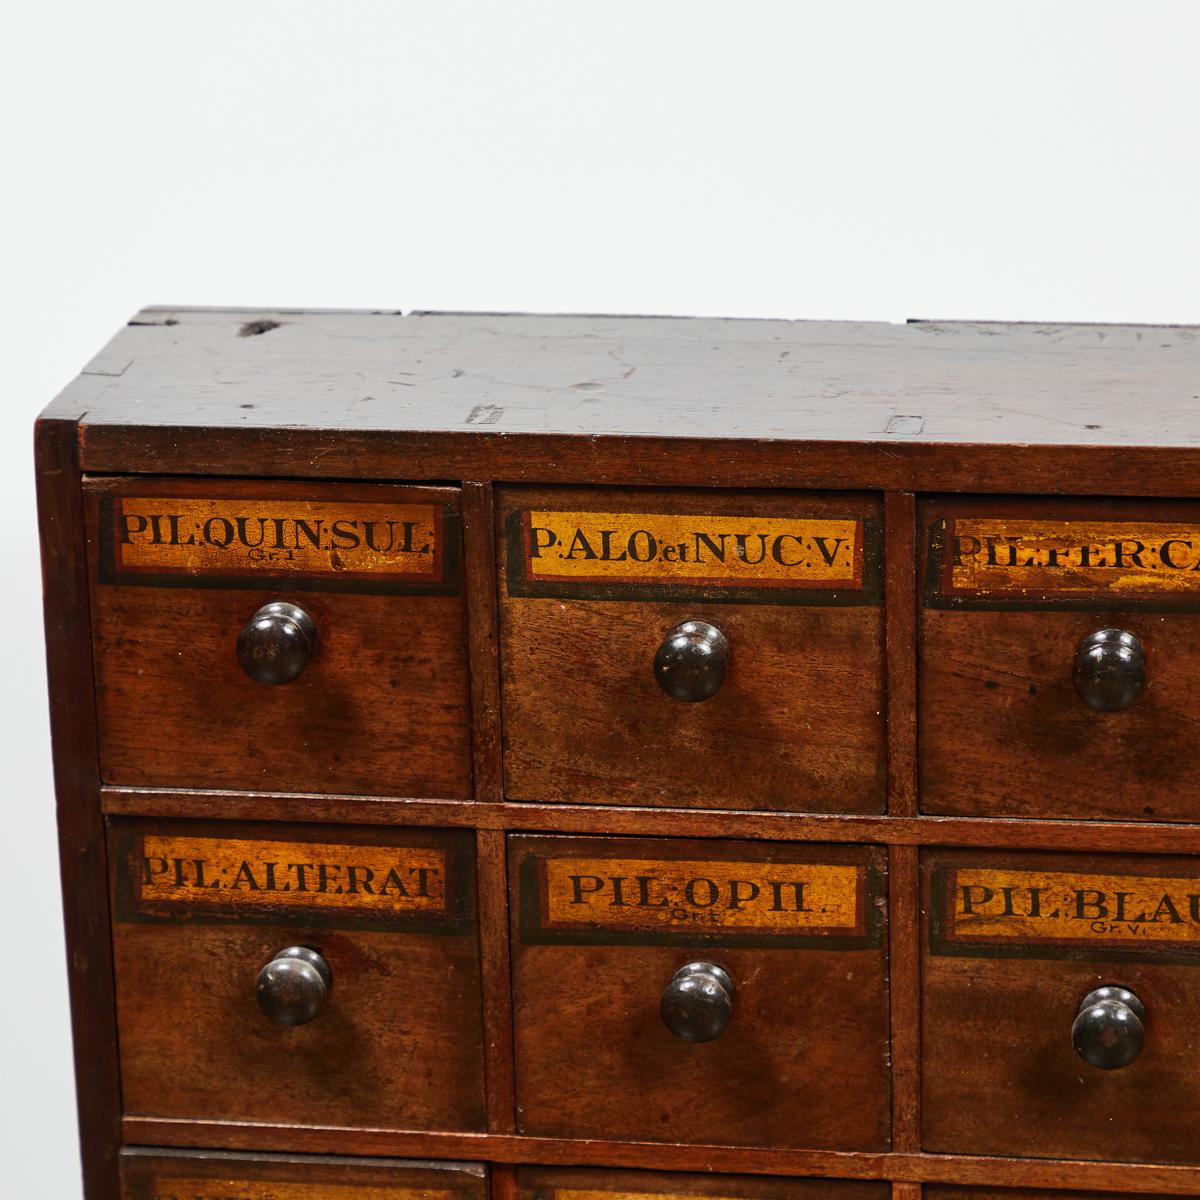 Early 19th century English apothecary wall chest with hand written labels, to hang or place on stand. The narrow rectangular body holds 28 square drawers with wooden knob handles.